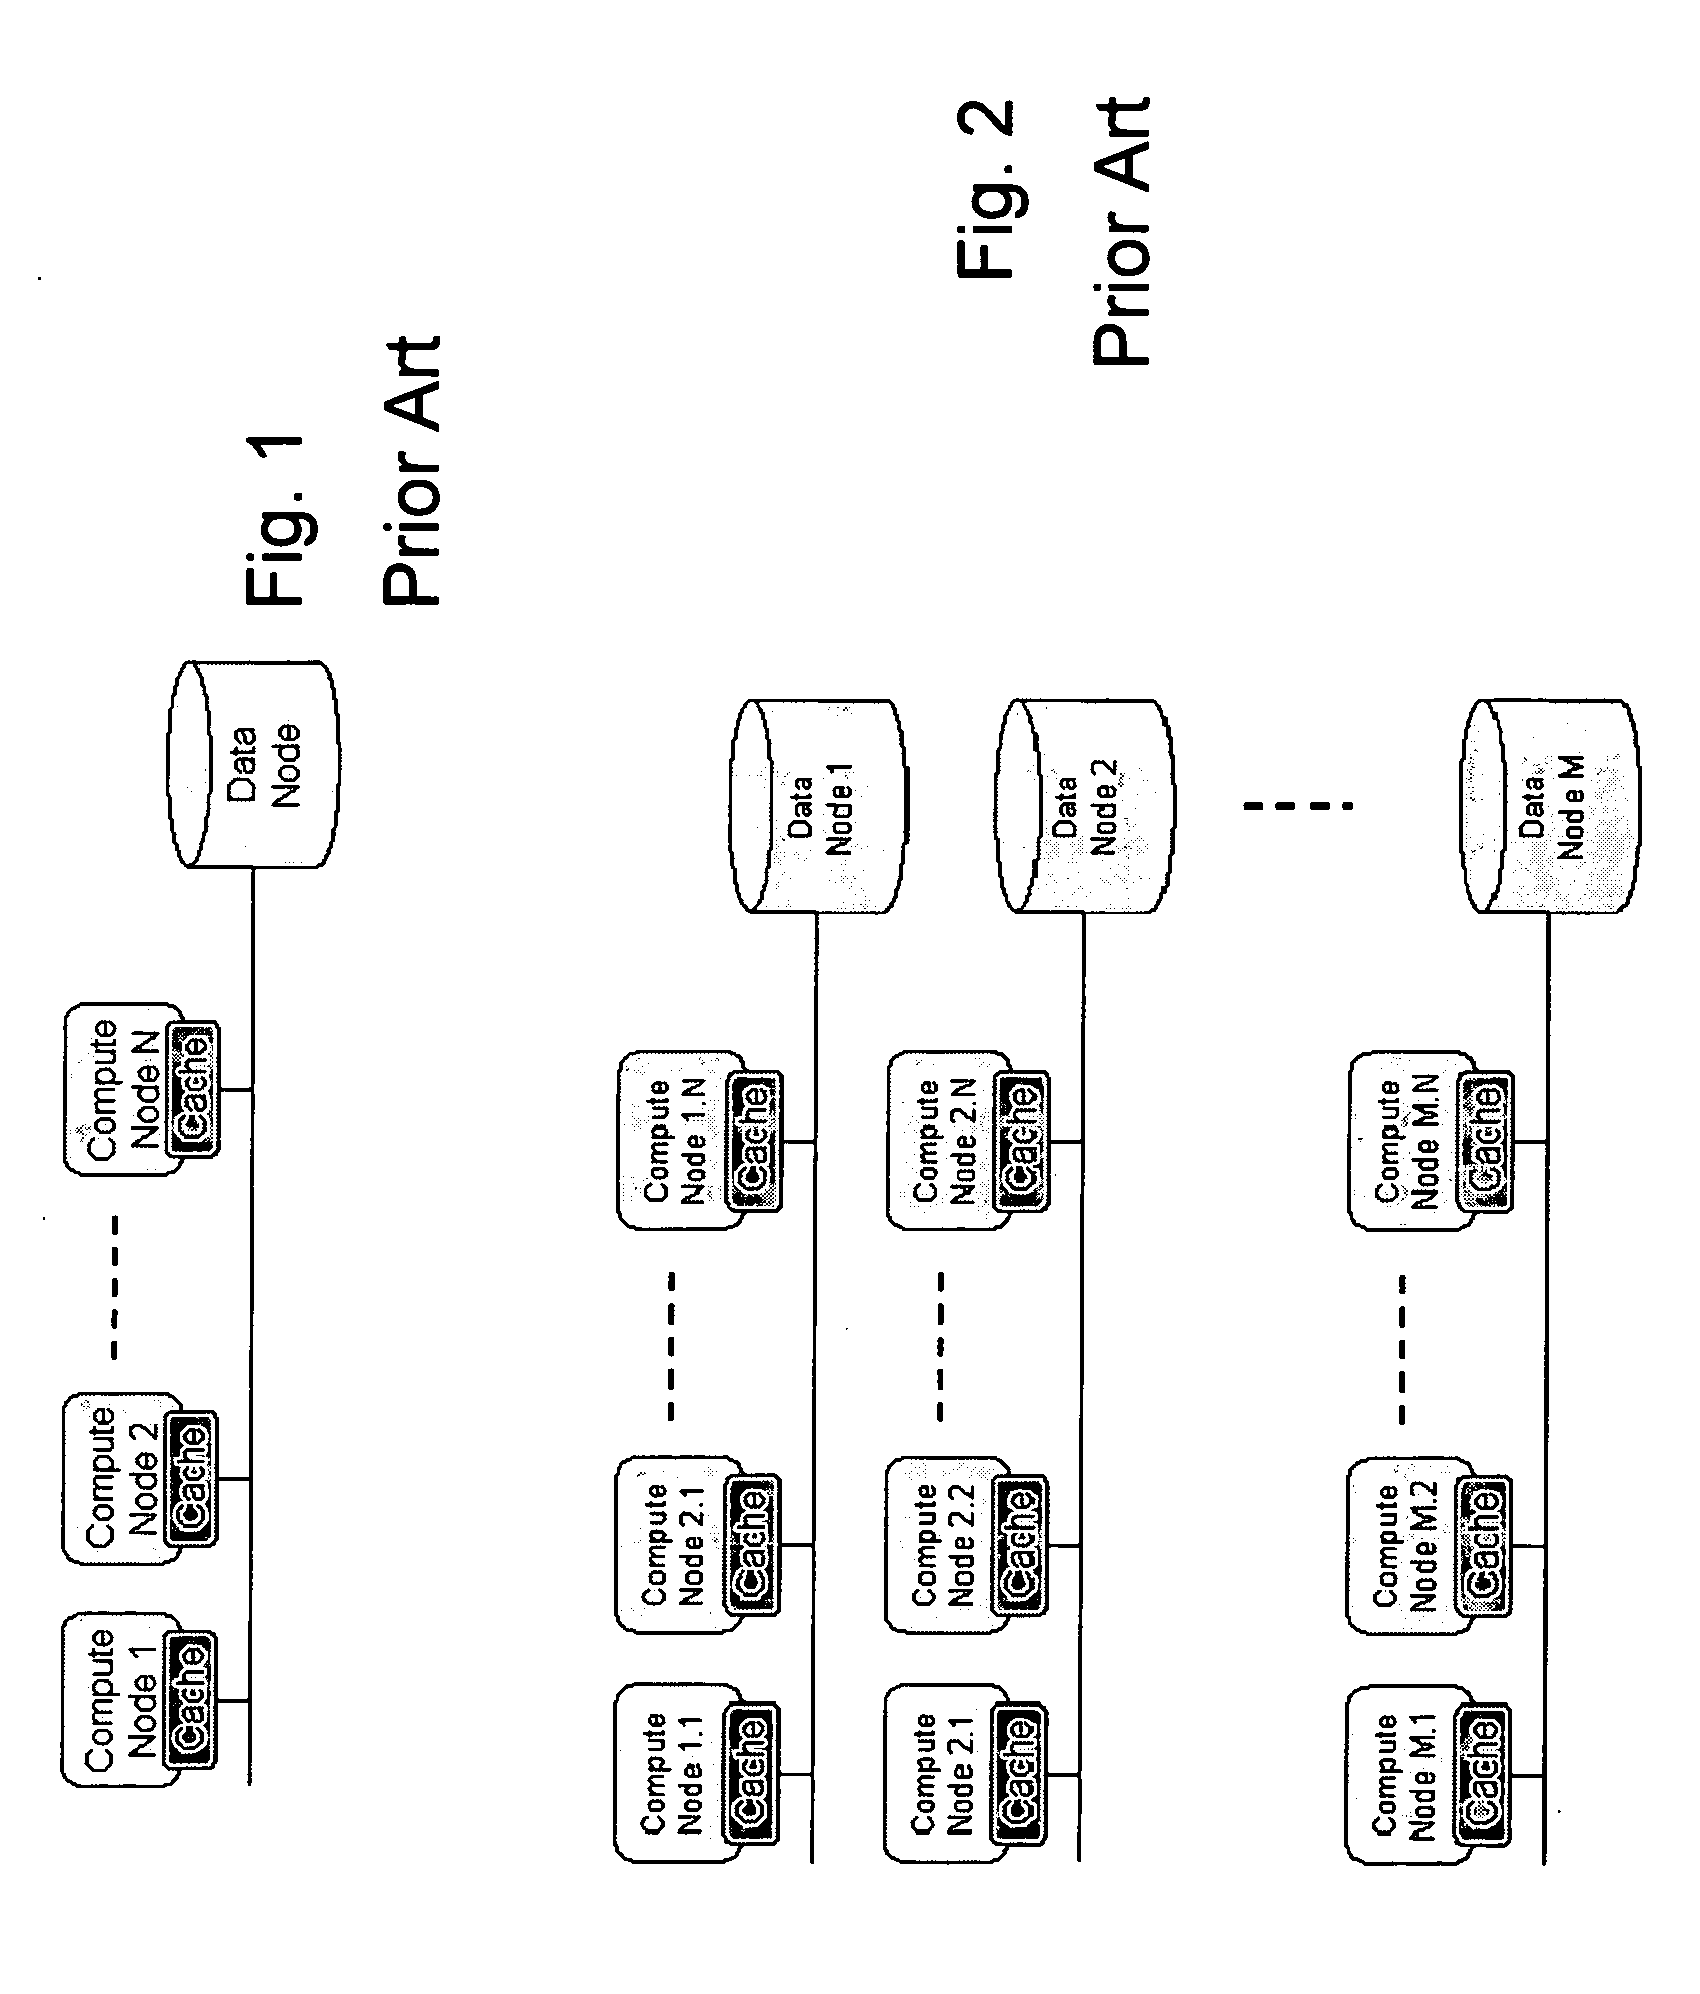 Method and apparatus for data management